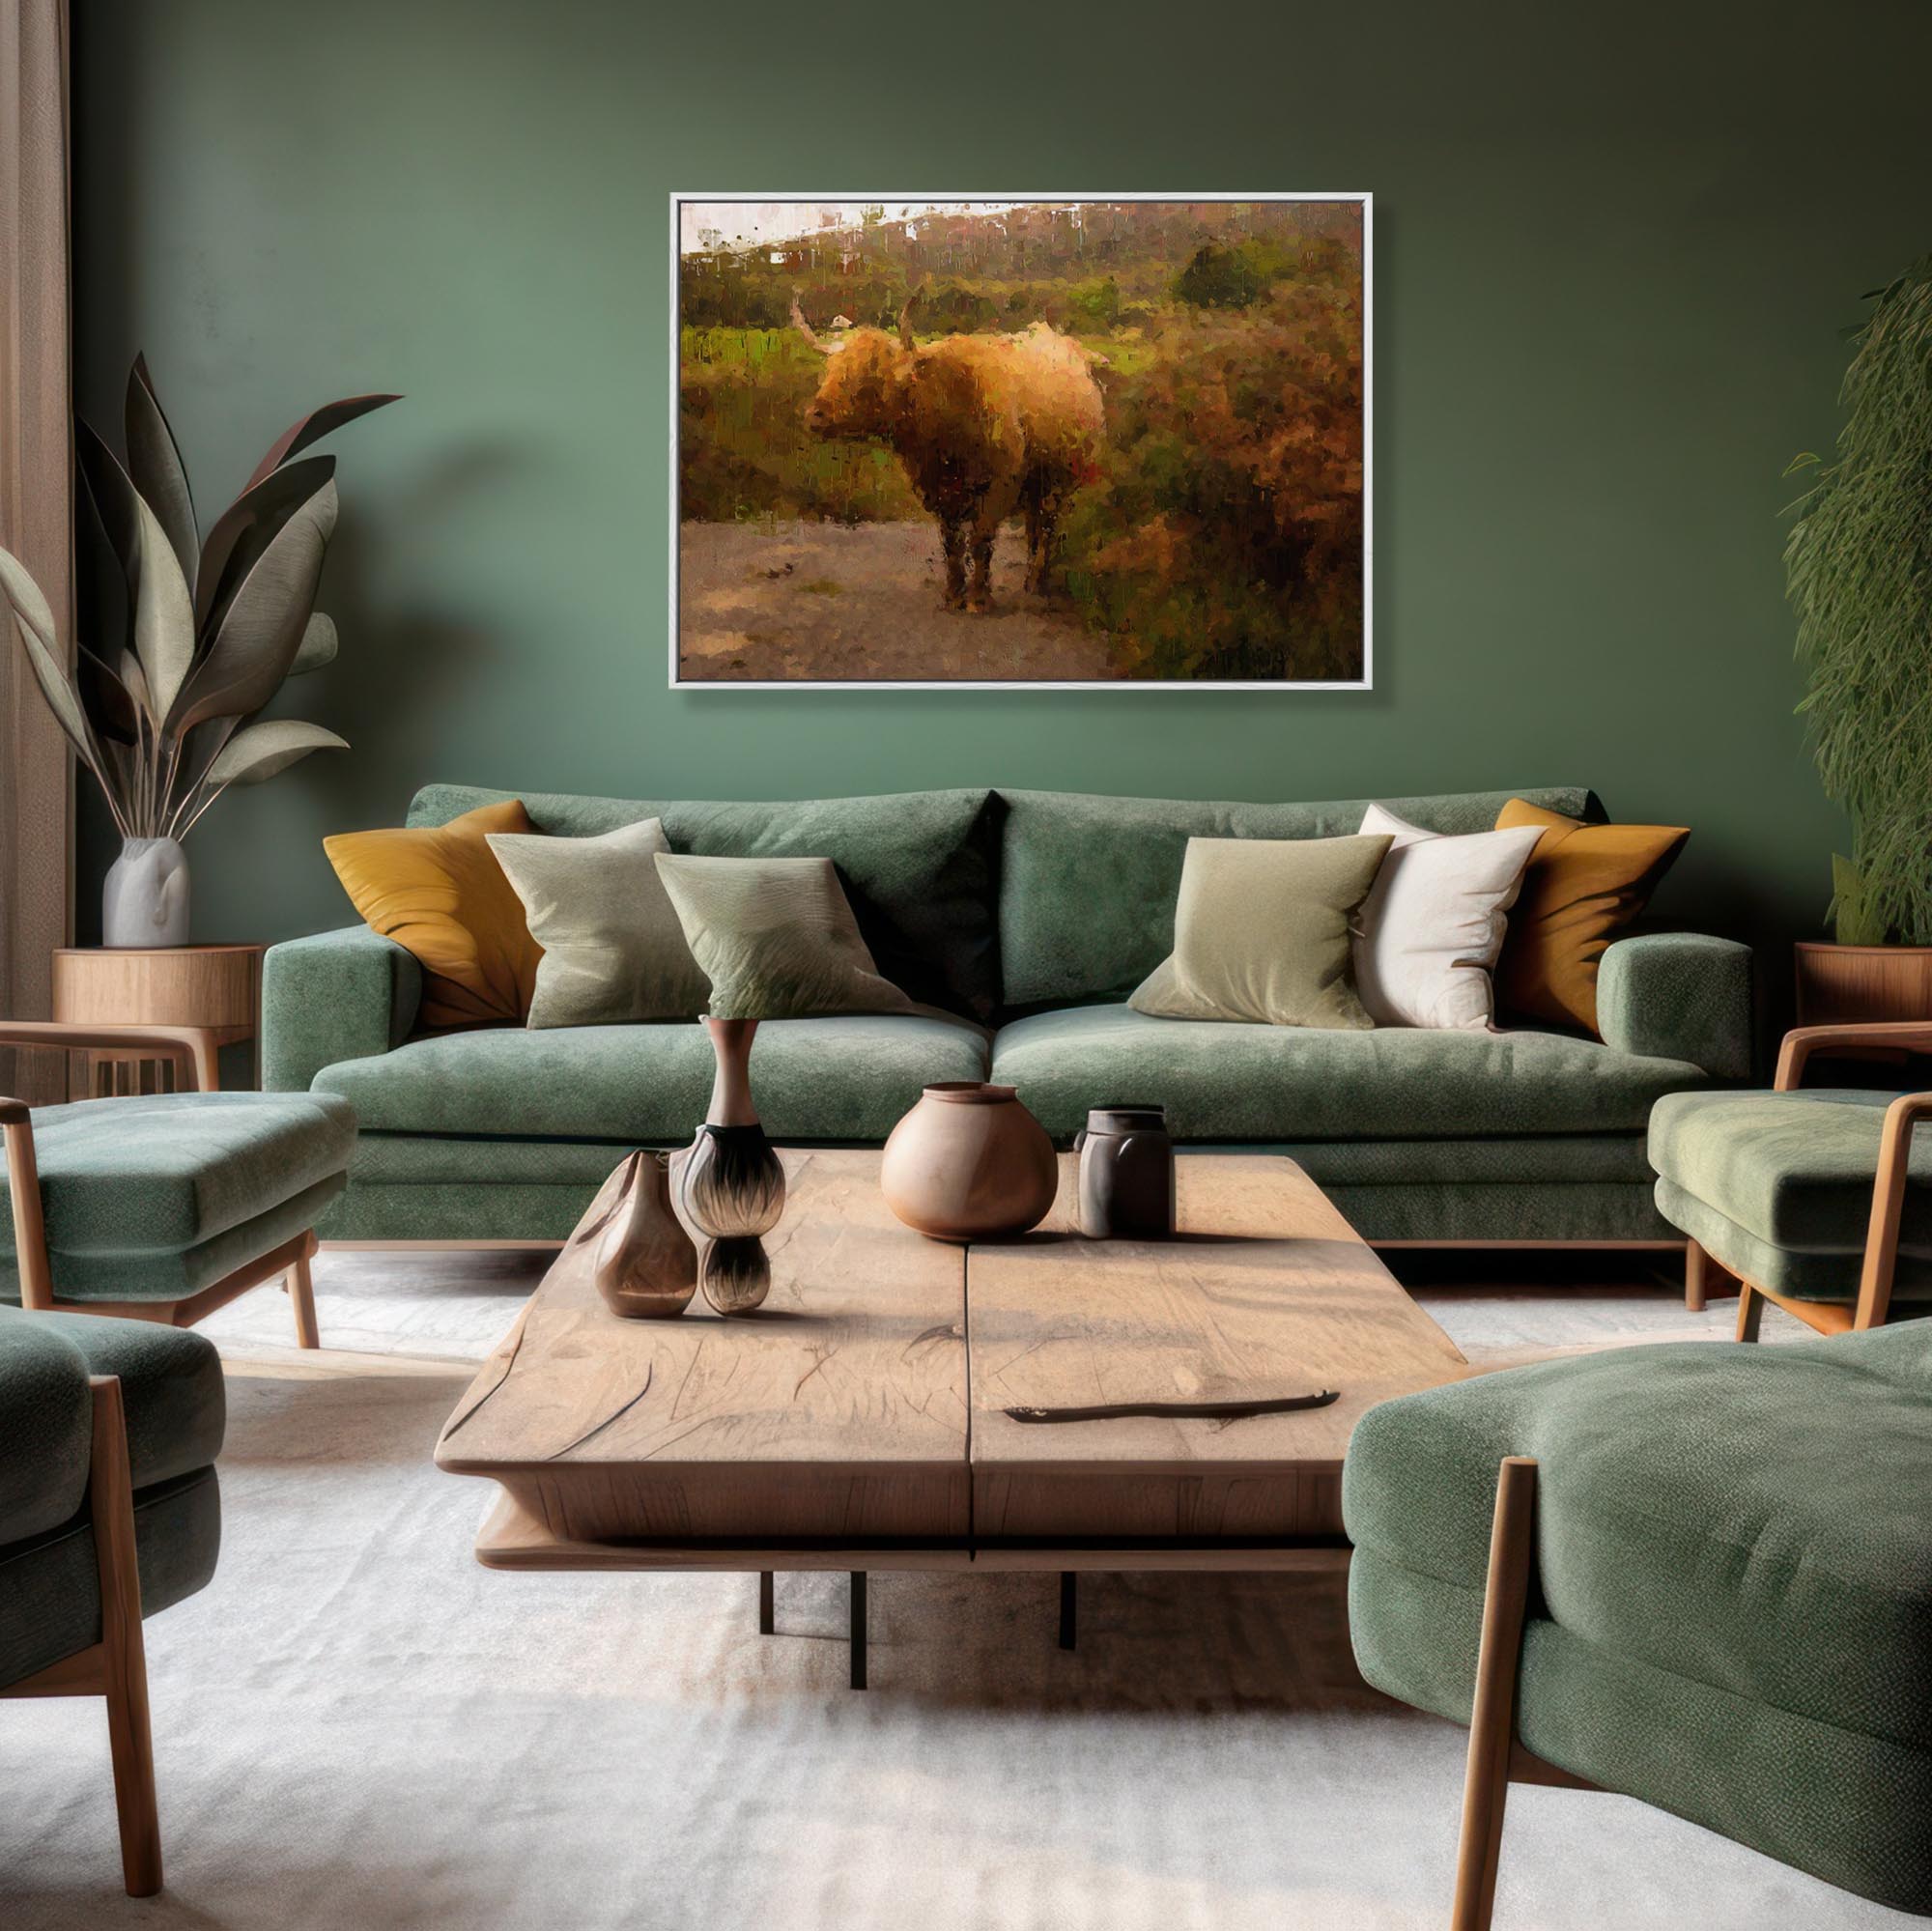 Highland Cow Oil Painting Print On Canvas-Abstract House